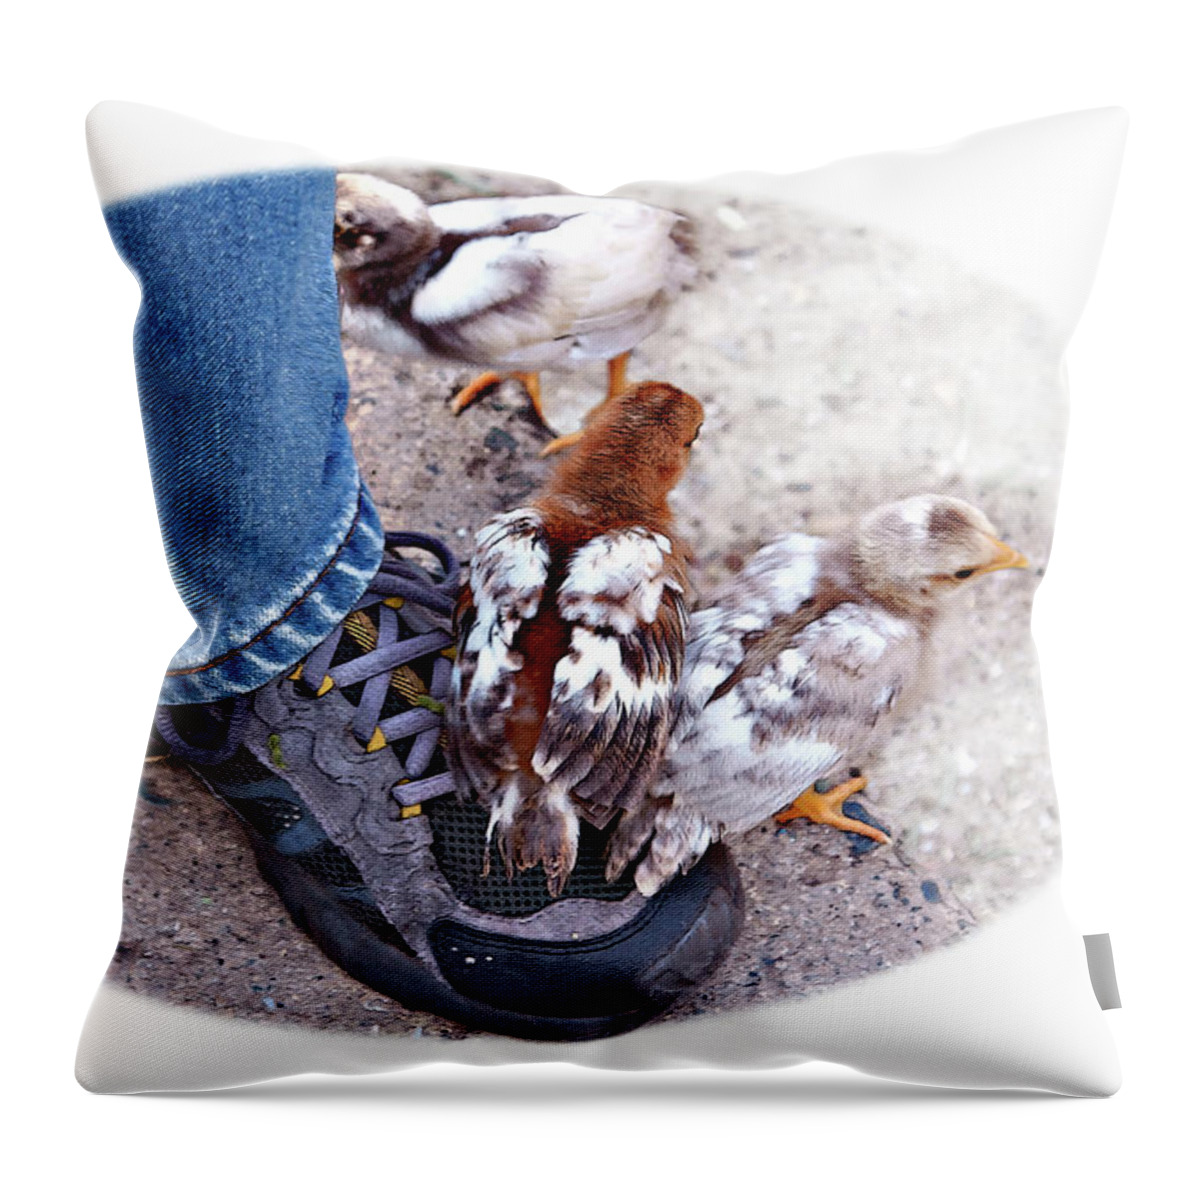 Chicken Throw Pillow featuring the photograph Friends by Tatiana Travelways